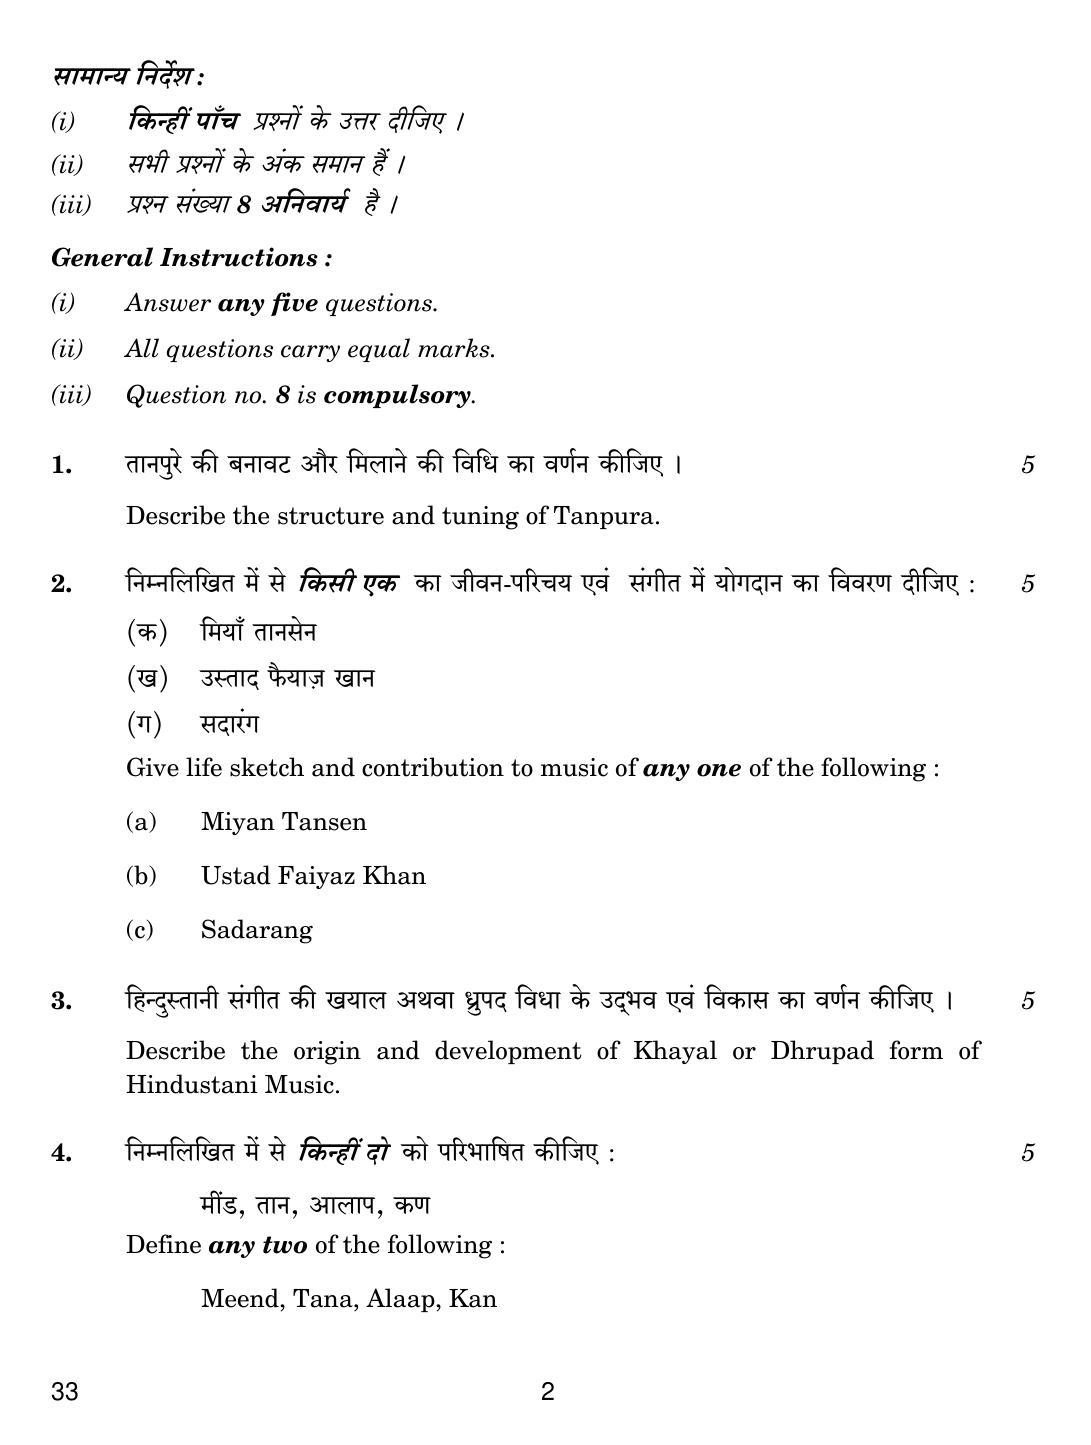 CBSE Class 10 33 HIND. MUSIC VOCAL 2019 Compartment Question Paper - Page 2